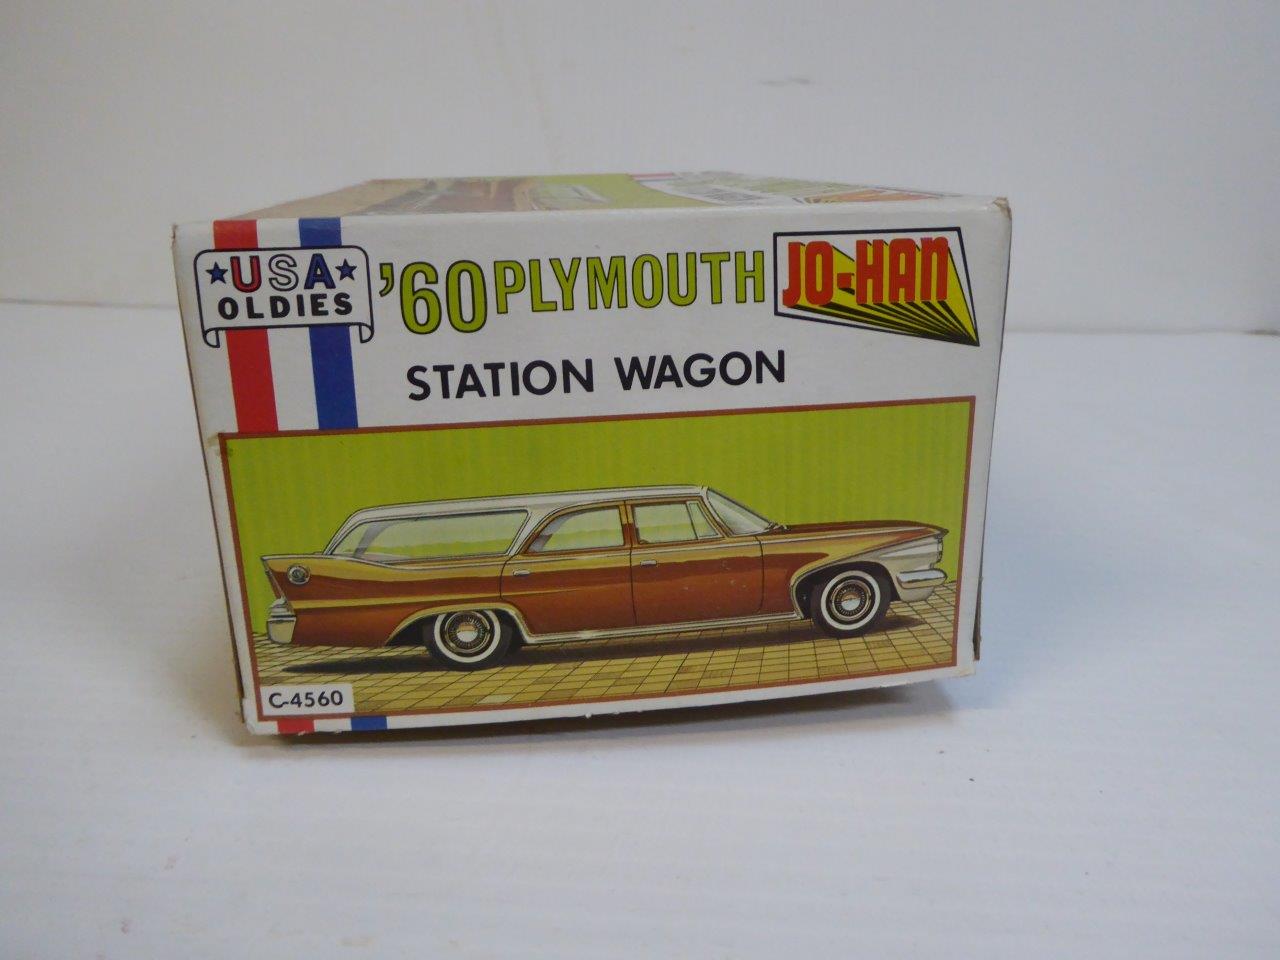 60s Plymouth Station Wagon by Jo-Han - Image 2 of 3